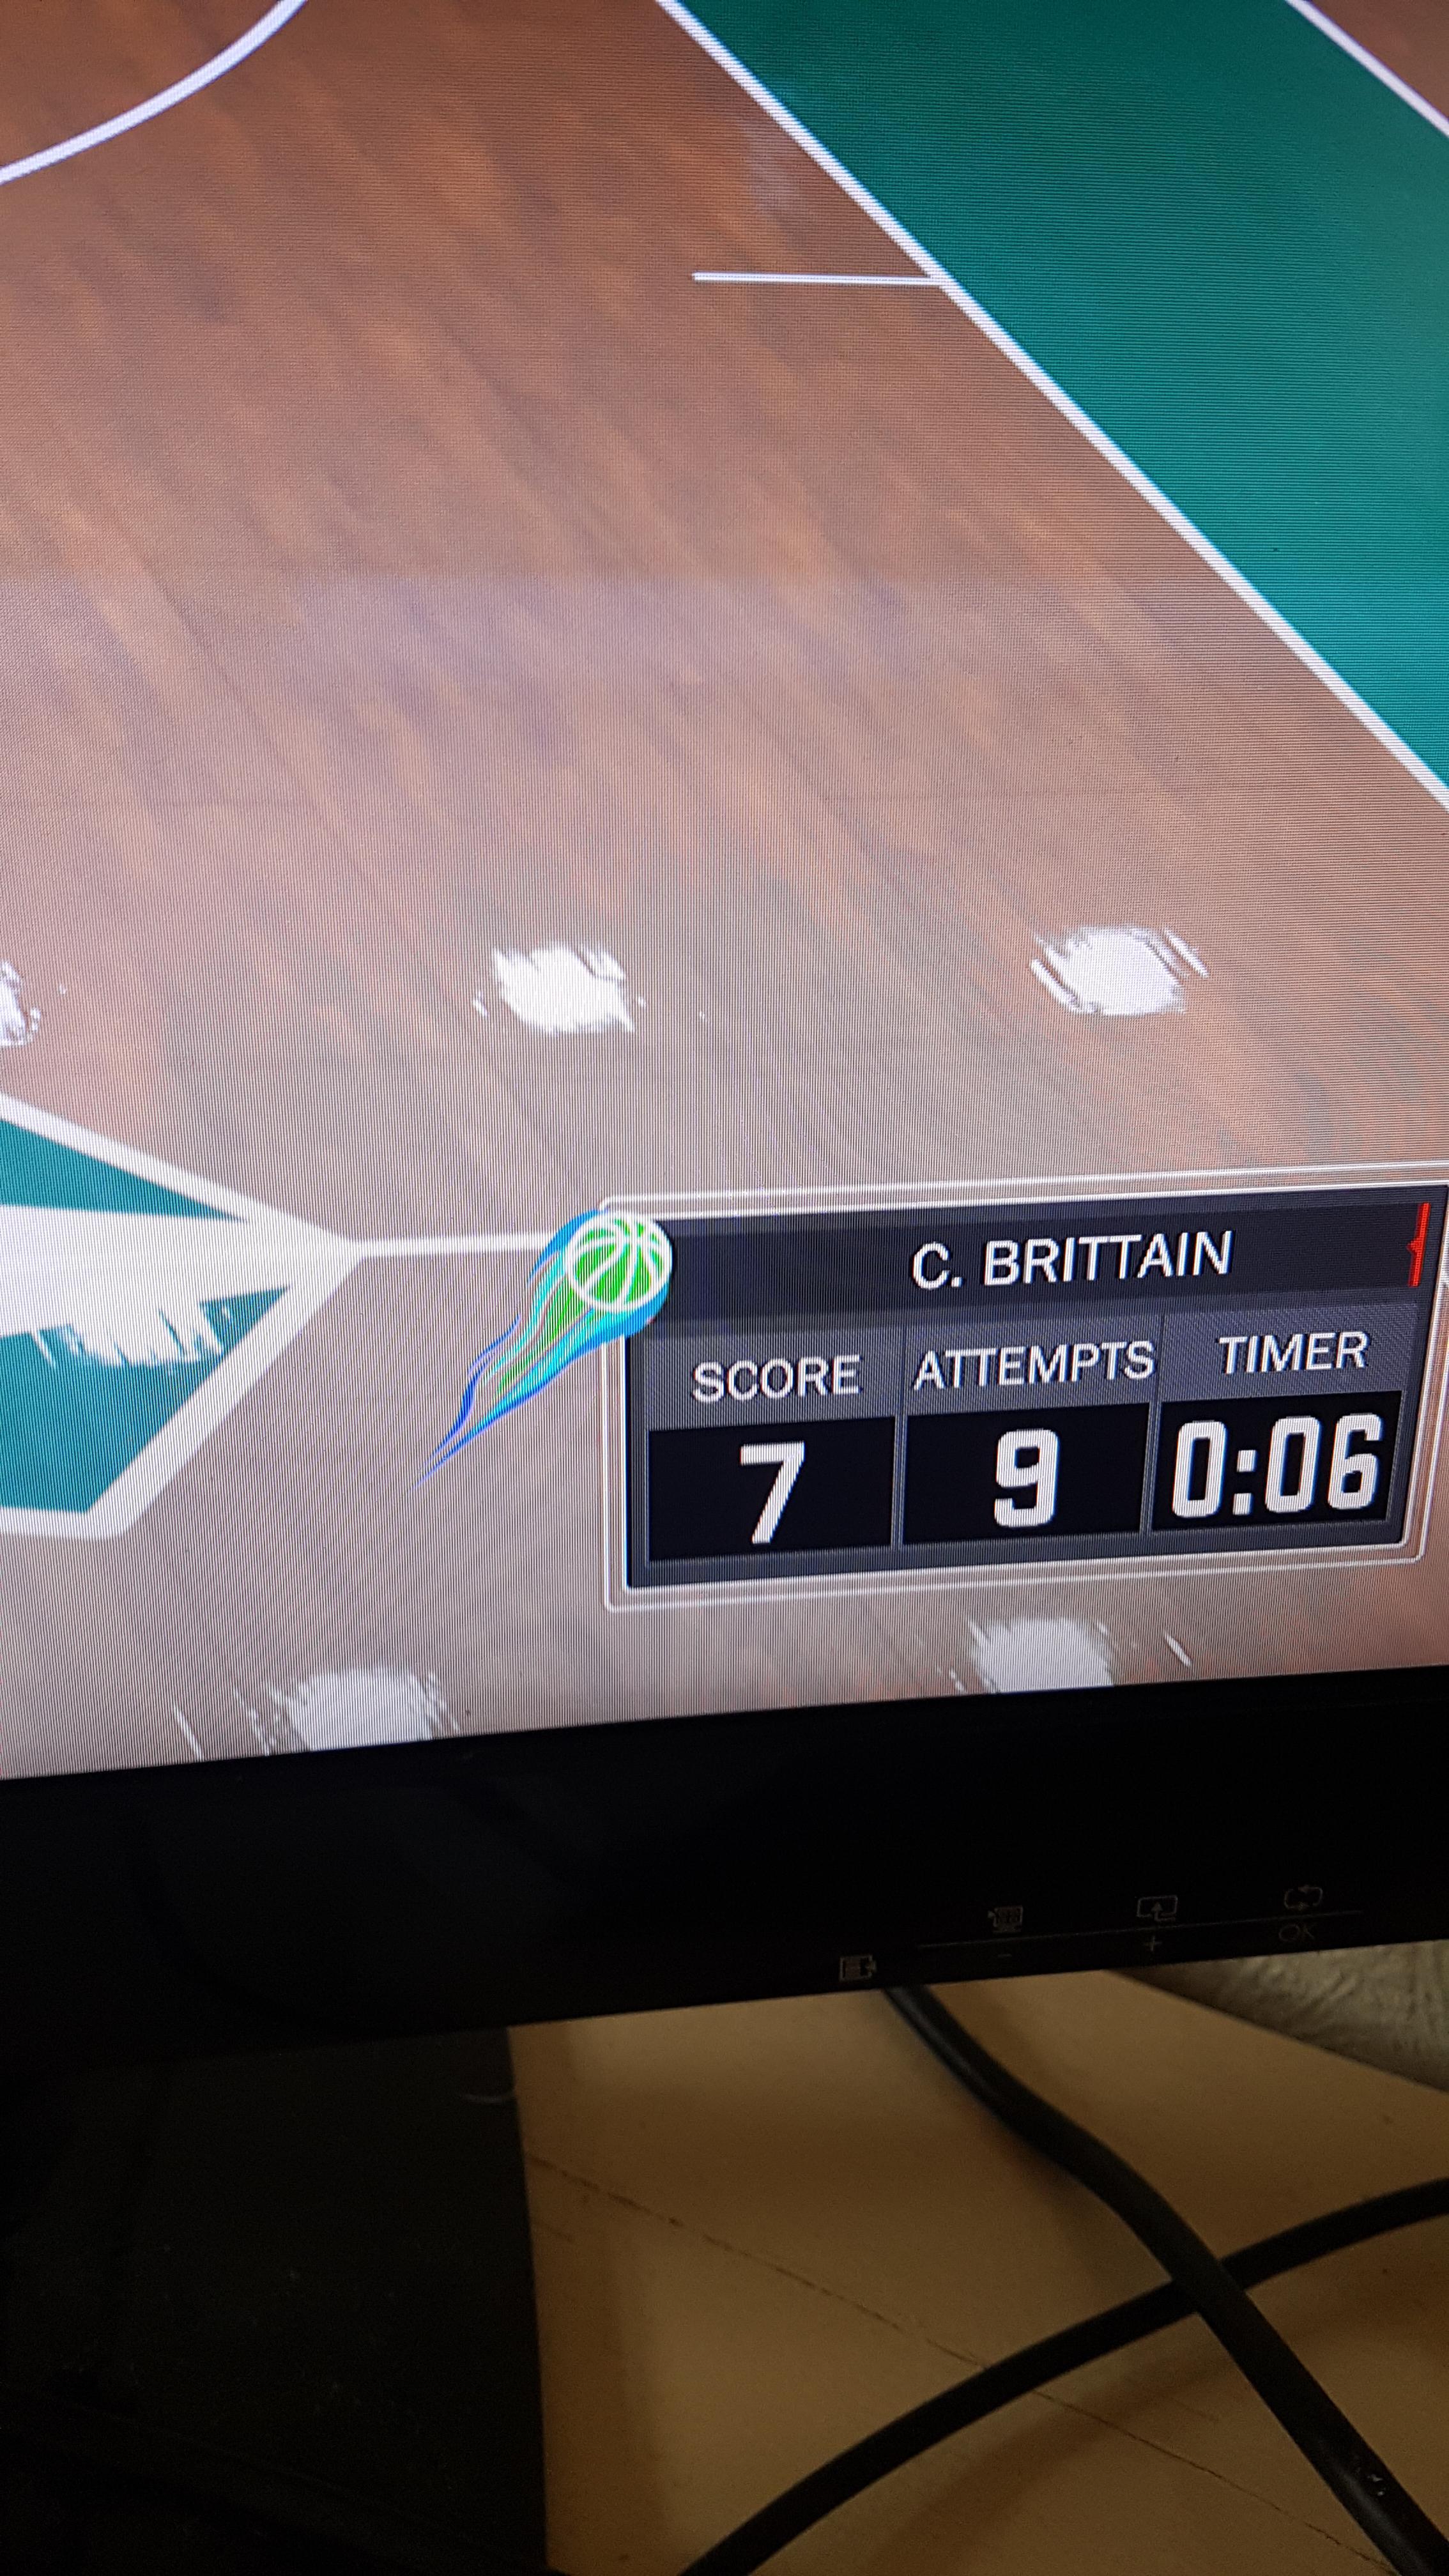 Mean Ball Logo - What's this green ball mean when it appears? : NBA2k